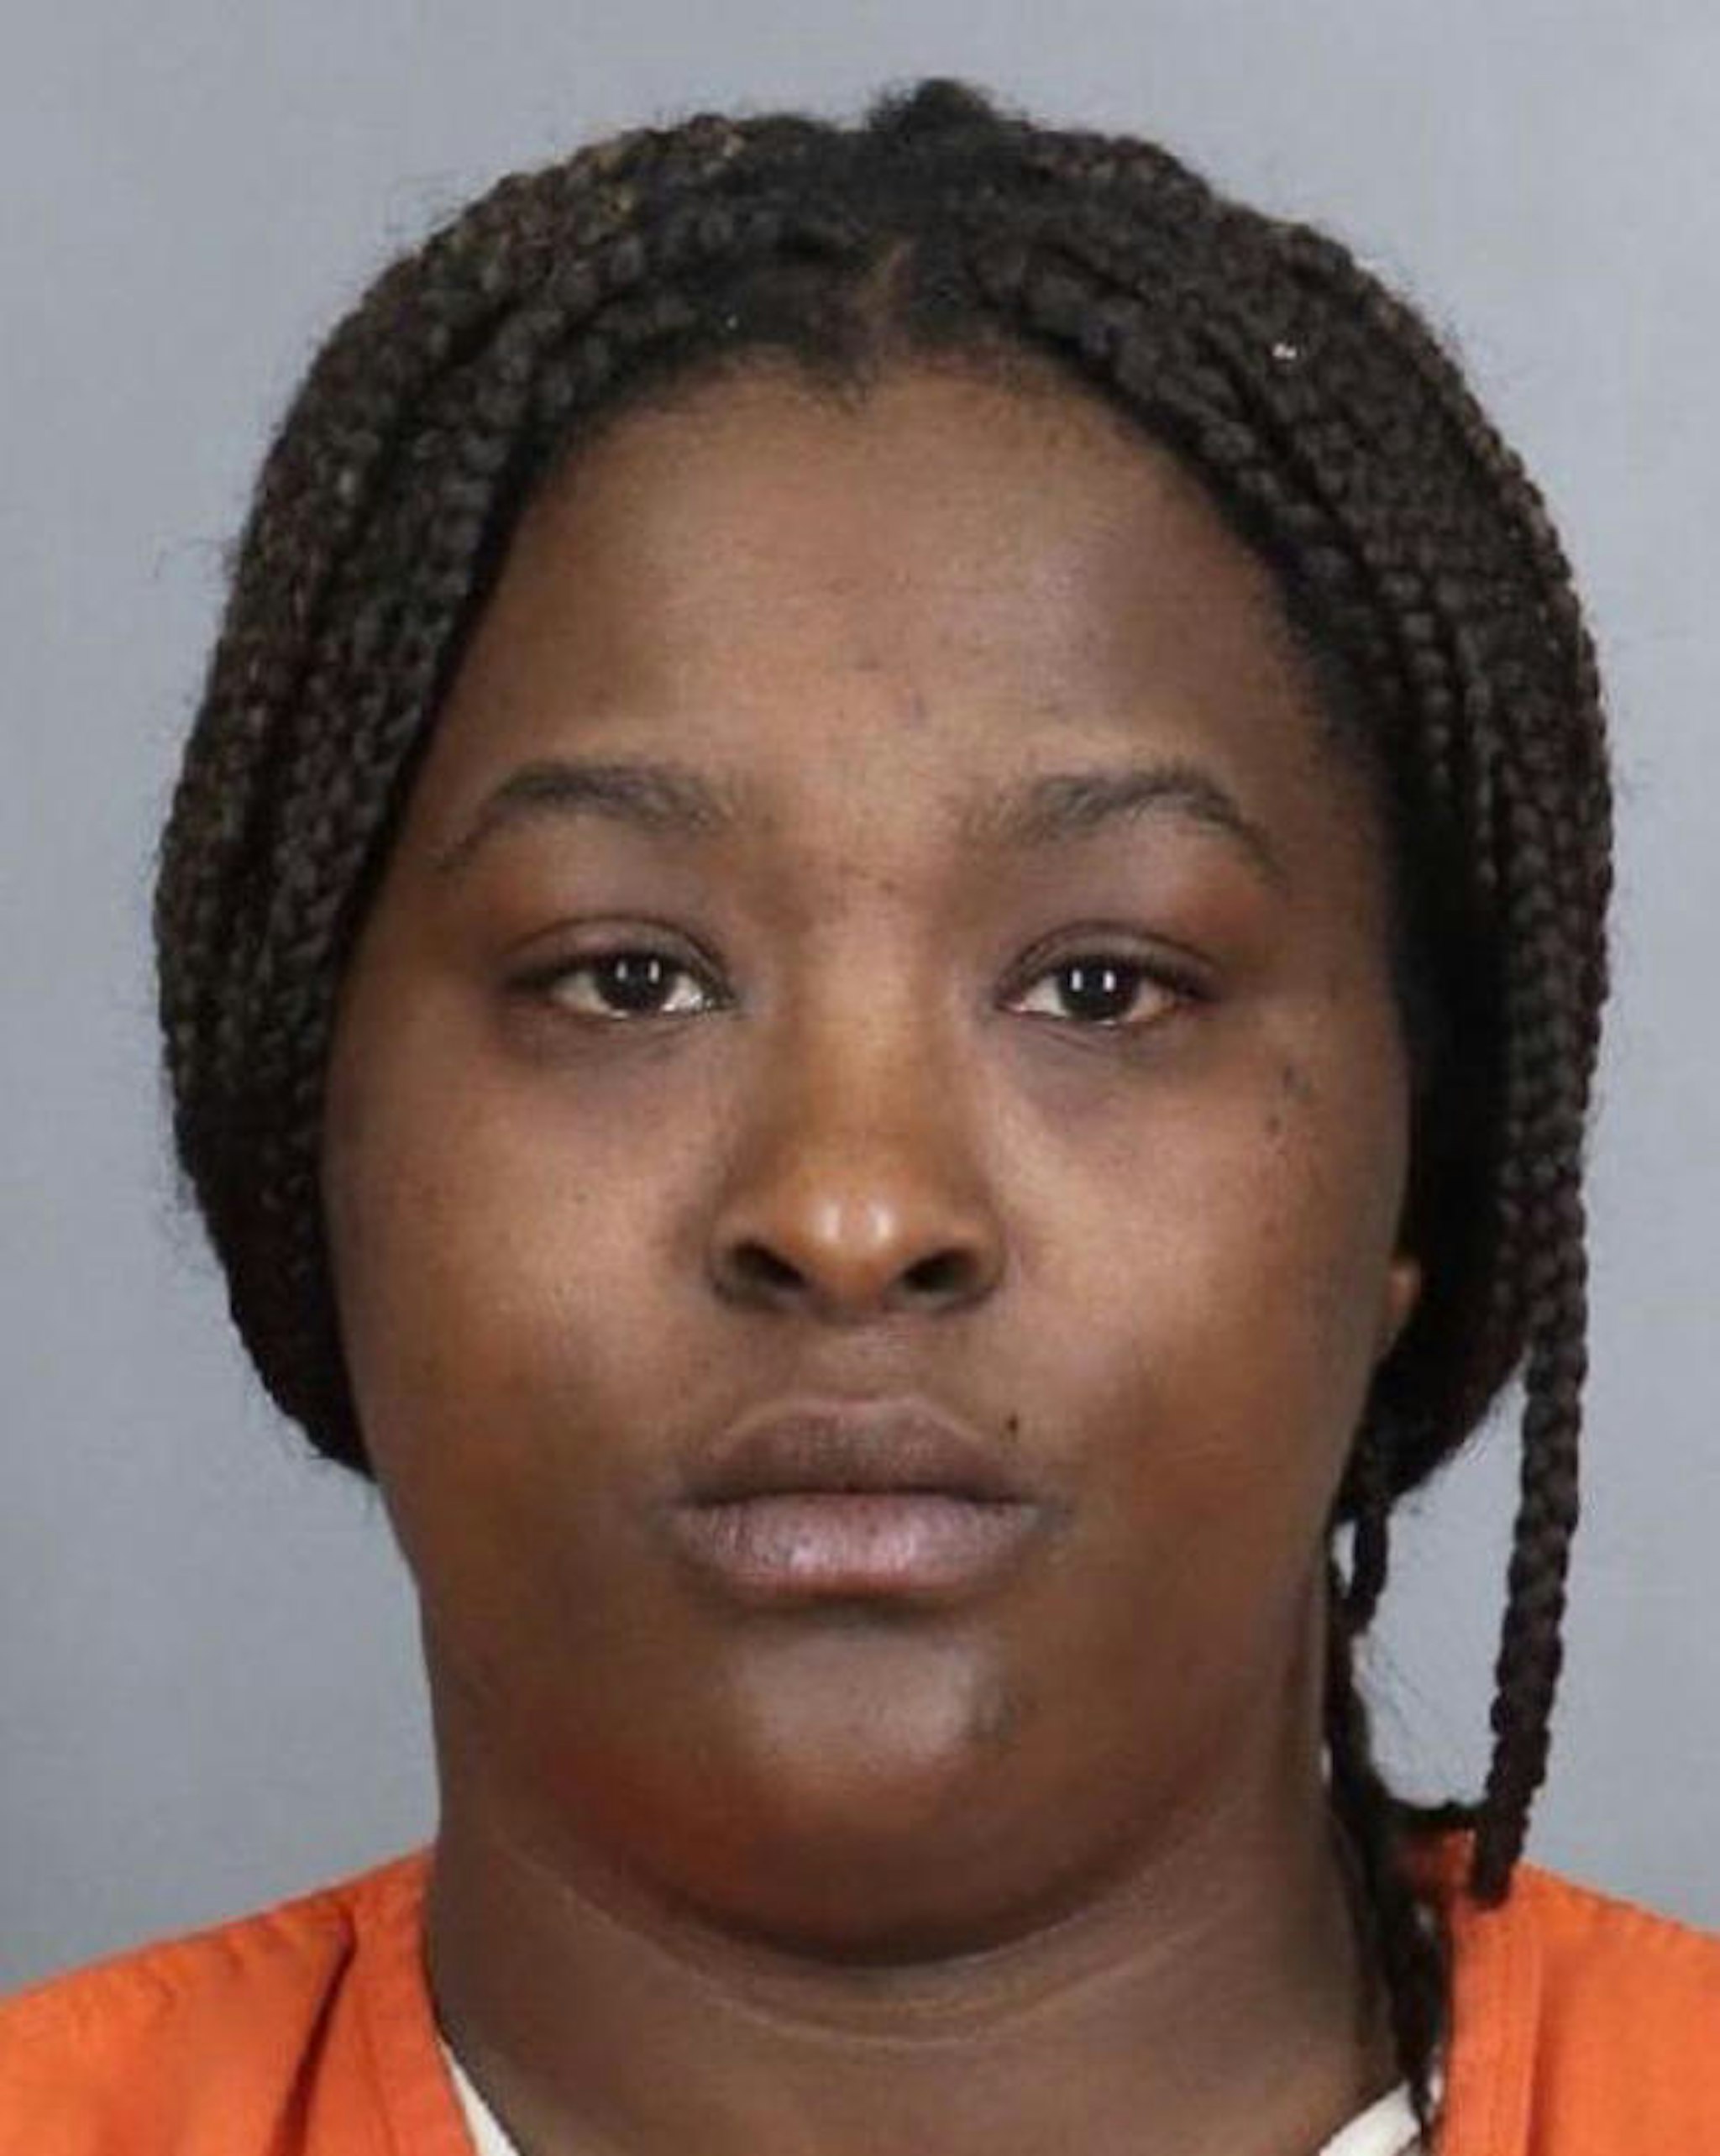 Kiarra Jones, 29, was arrested after being caught on camera abusing a special needs child.